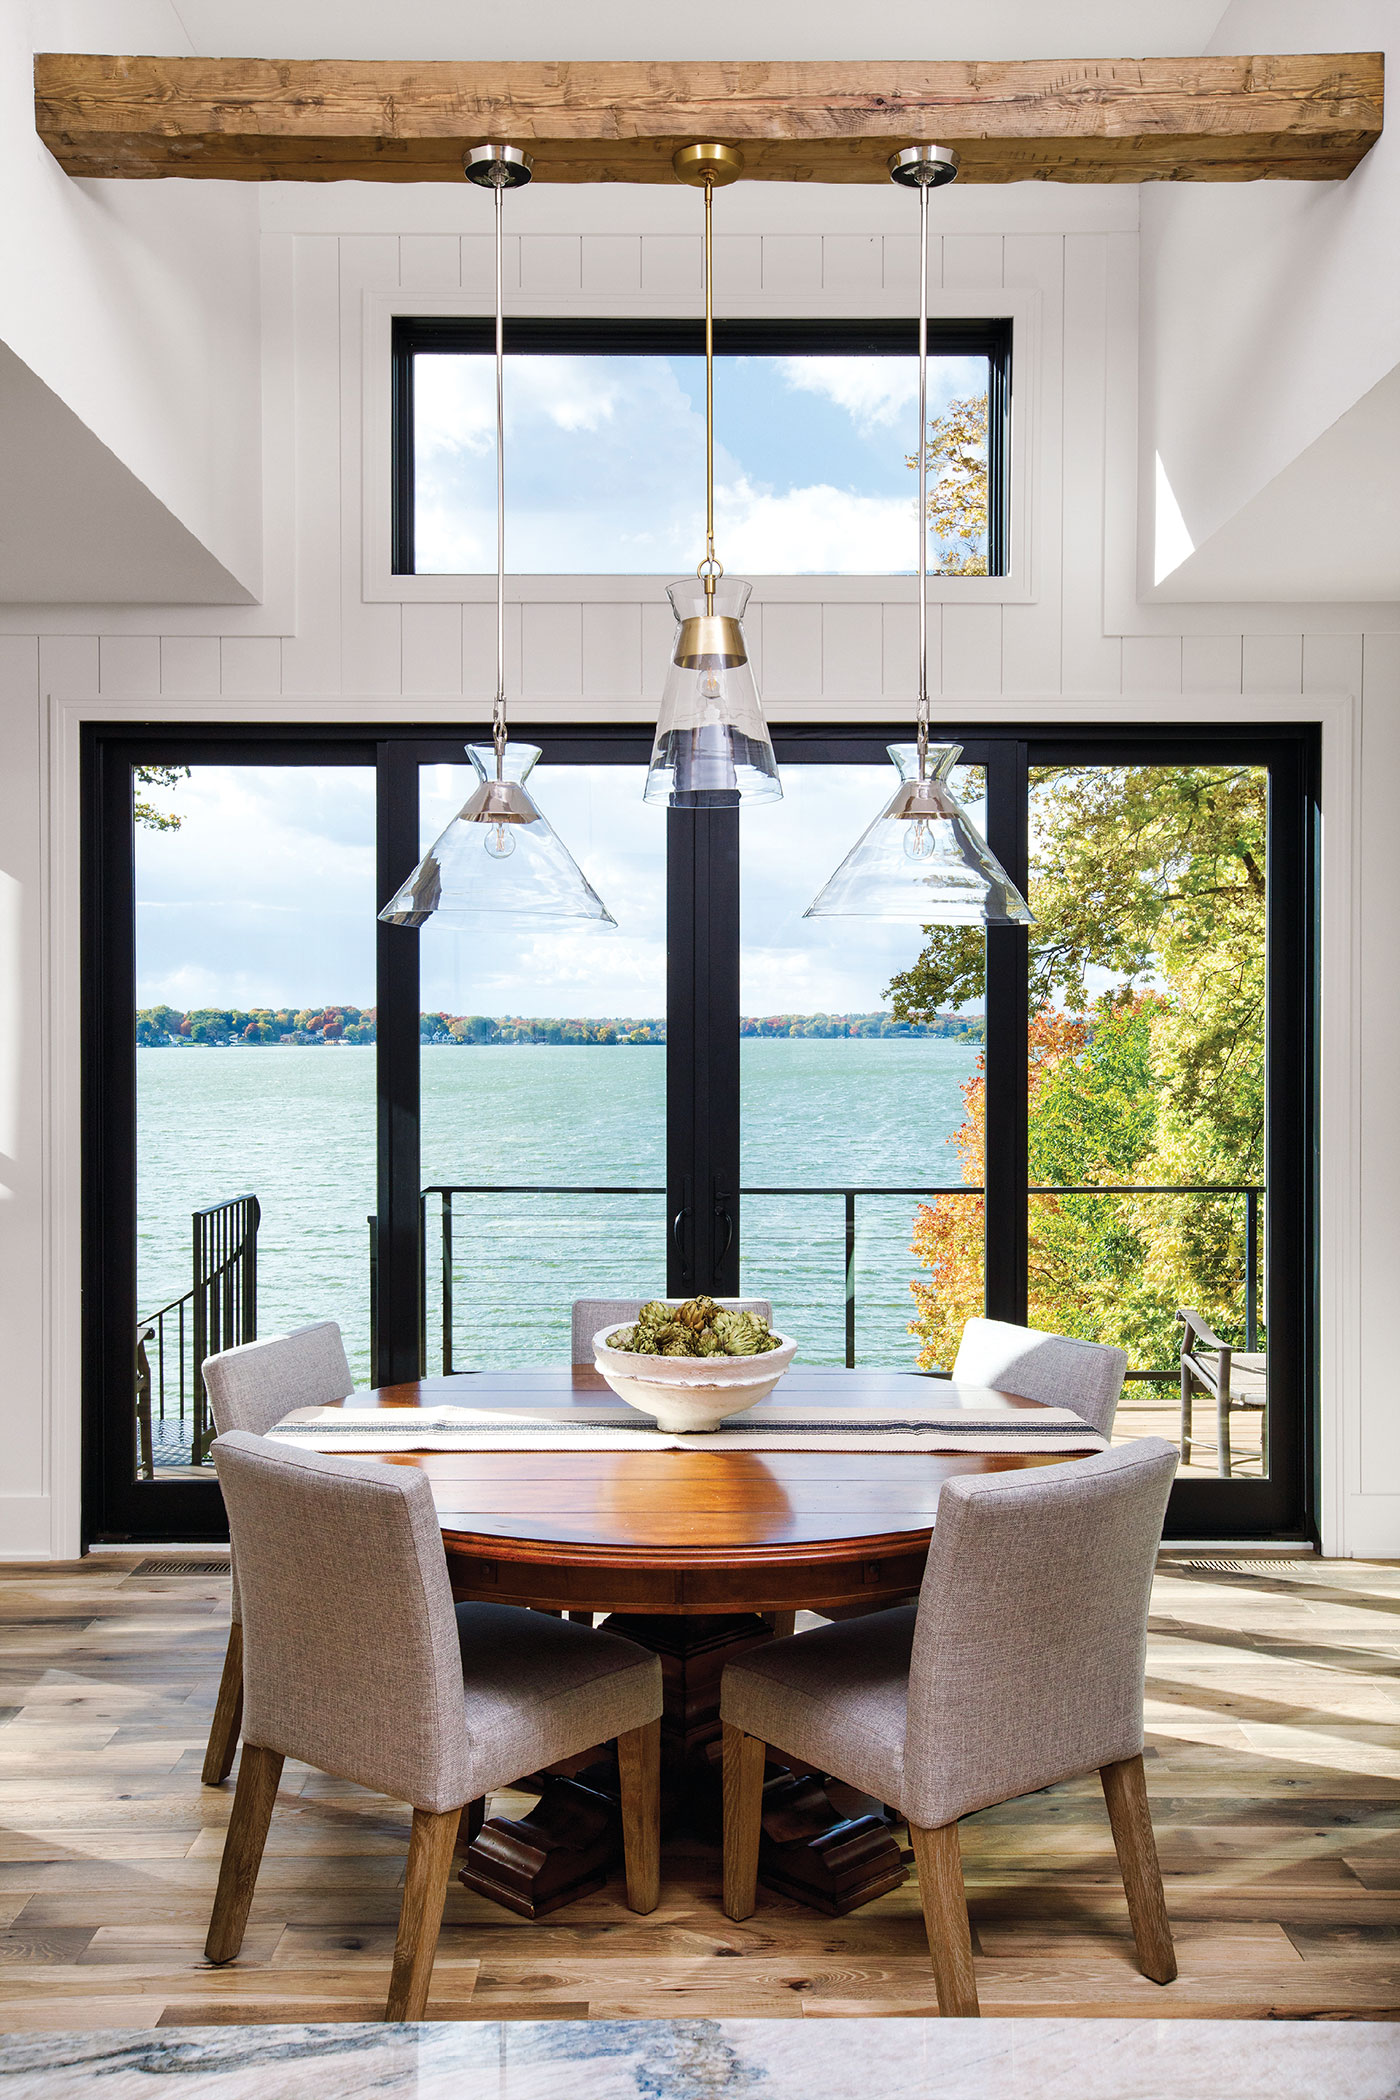 four black framed modern looking doors allow the ocean view to enter the comfortable dining room